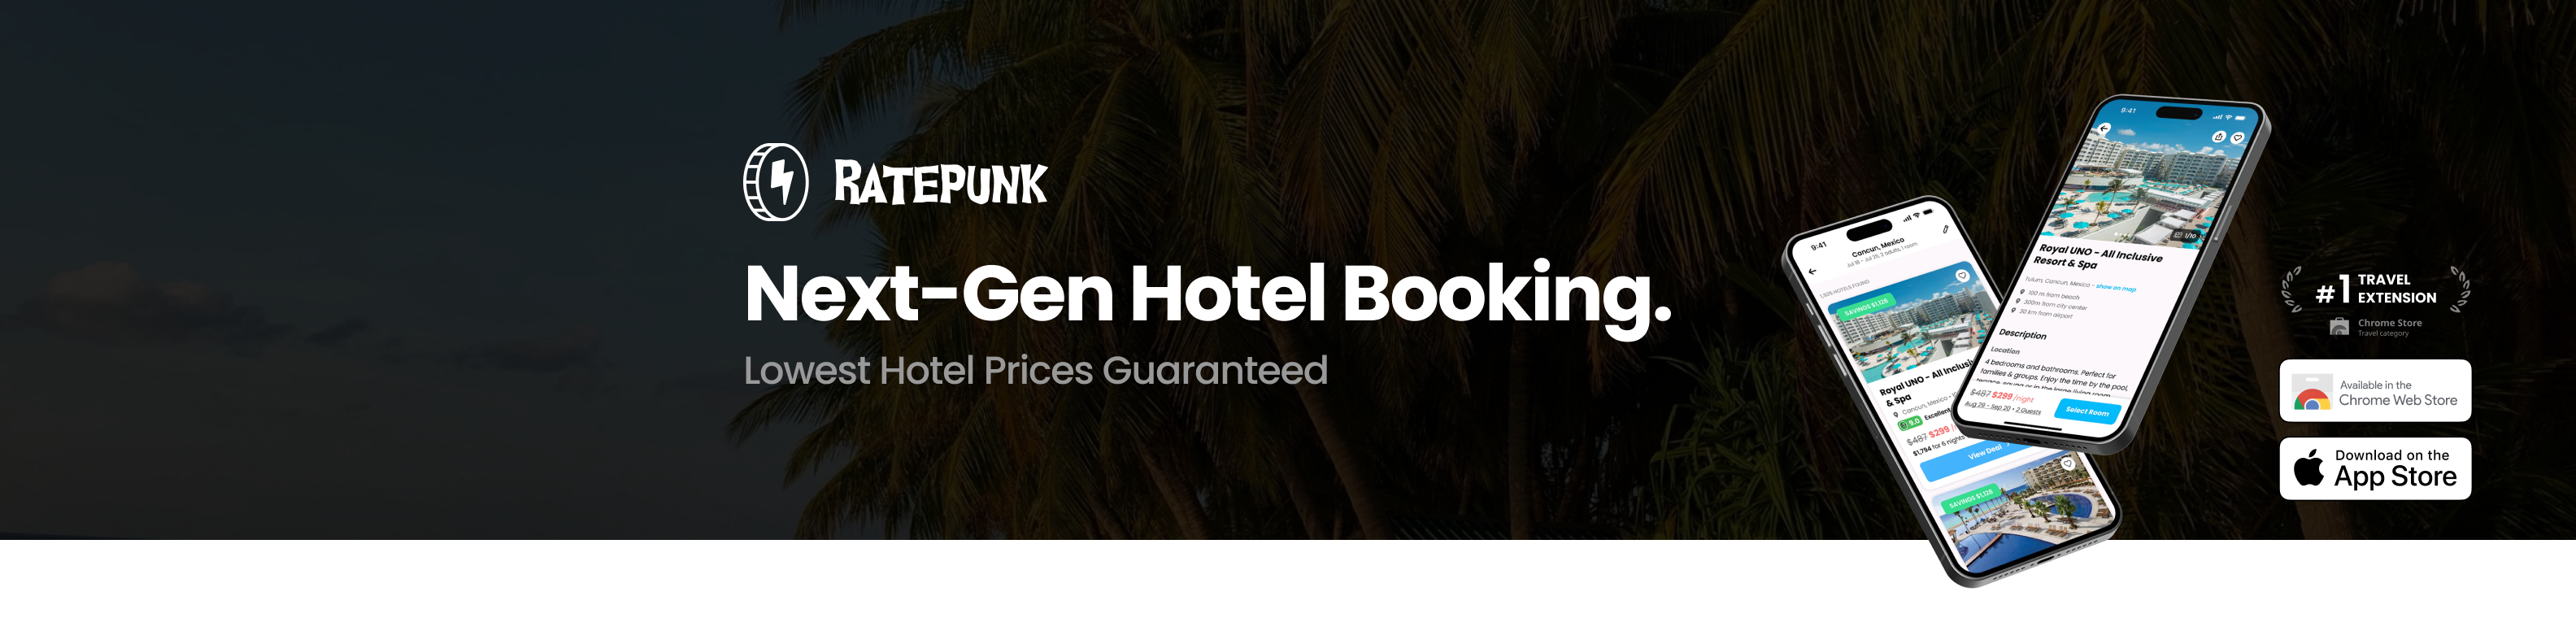 ratepunk - next gen hotel booking site lowest hotel price guaranteed